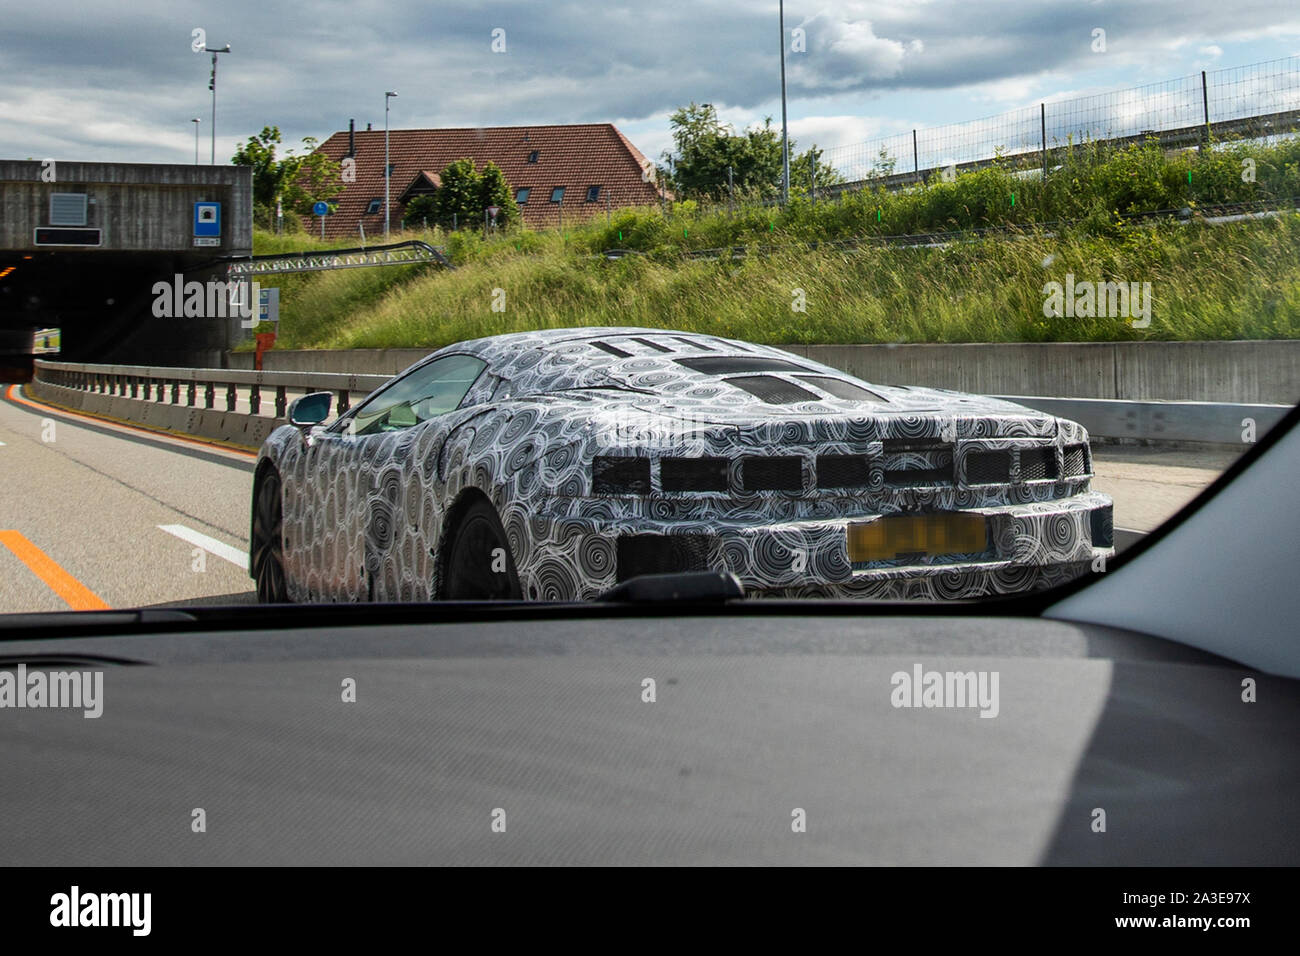 A McLaren GT prototype test vehiche photographed doing road tests in Switzerland. Rear end and air intake heavily camouflaged with both camo tape and extra panels. Tail lights are hidden under mesh panel. The new GT model was first announced at the 2019 Geneva Auto Salon, but details about the car was first released in May same year. These images were taken in June 2019 and differs from earlier photos in having extra panels popped onto the rear and the side, as well as tail lights camouflaged. The outline of the tail lights are visible through the tape. Stock Photo